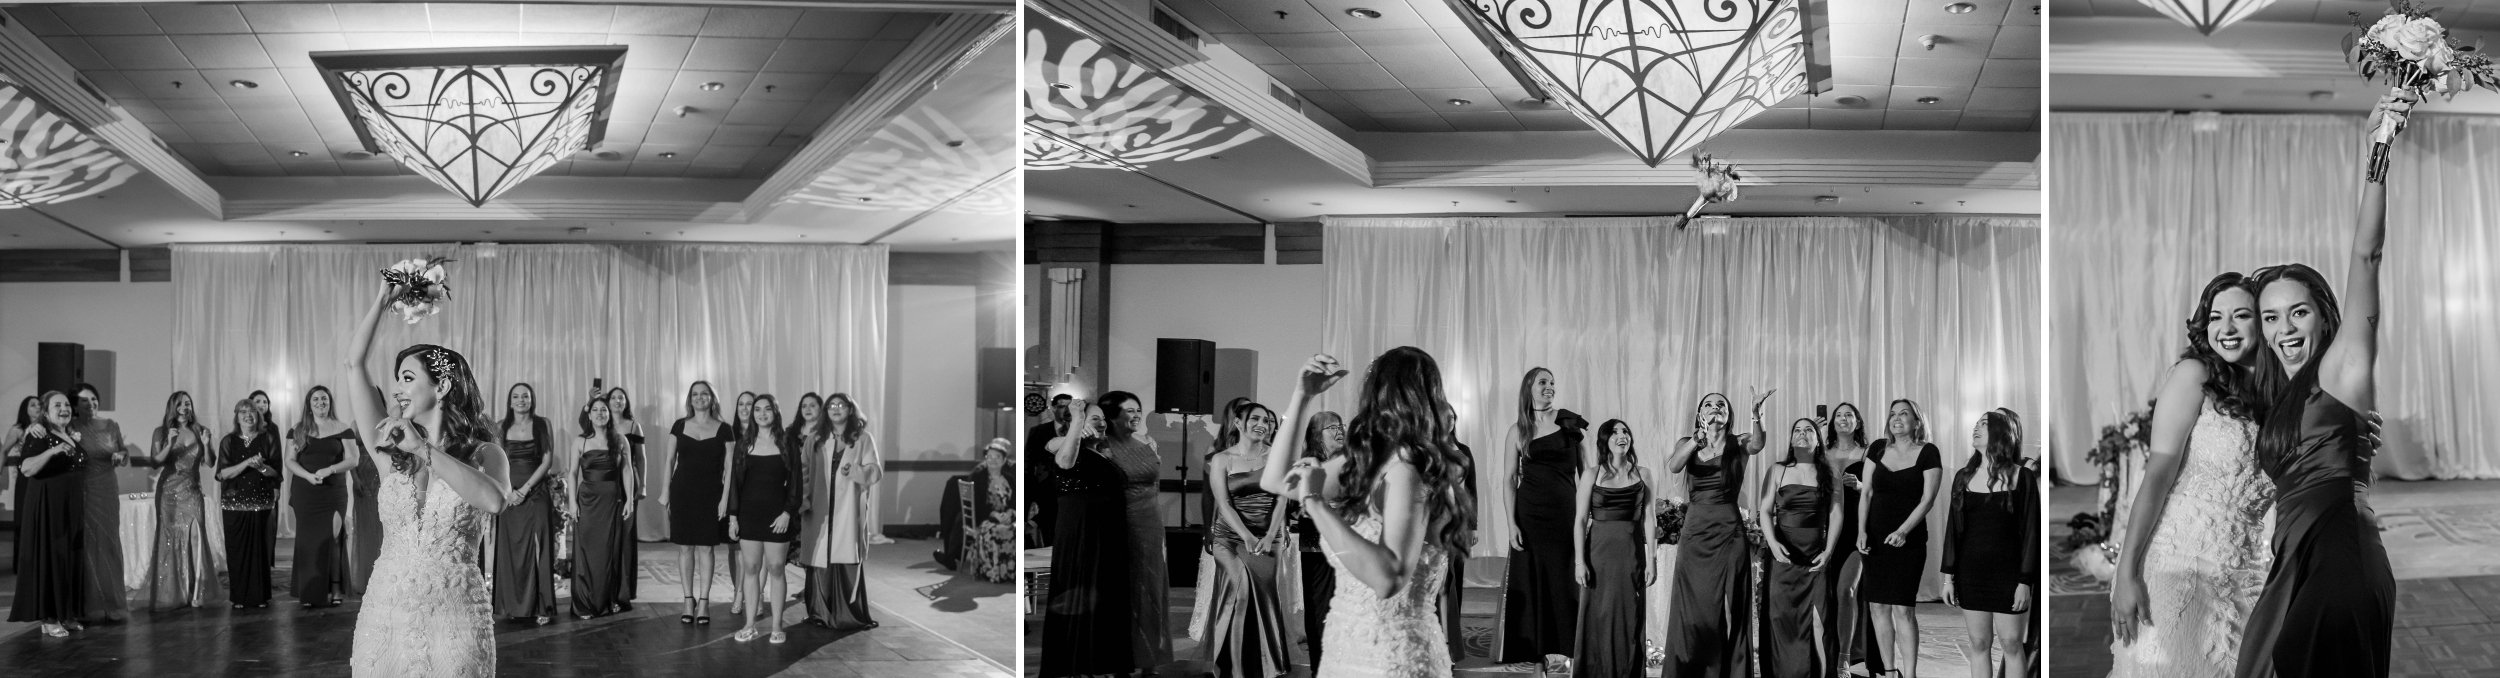 Wedding FIRST UNITED METHODIST CHURCH OF CORAL GABLES - Photography by Santy Martinez 39.jpg